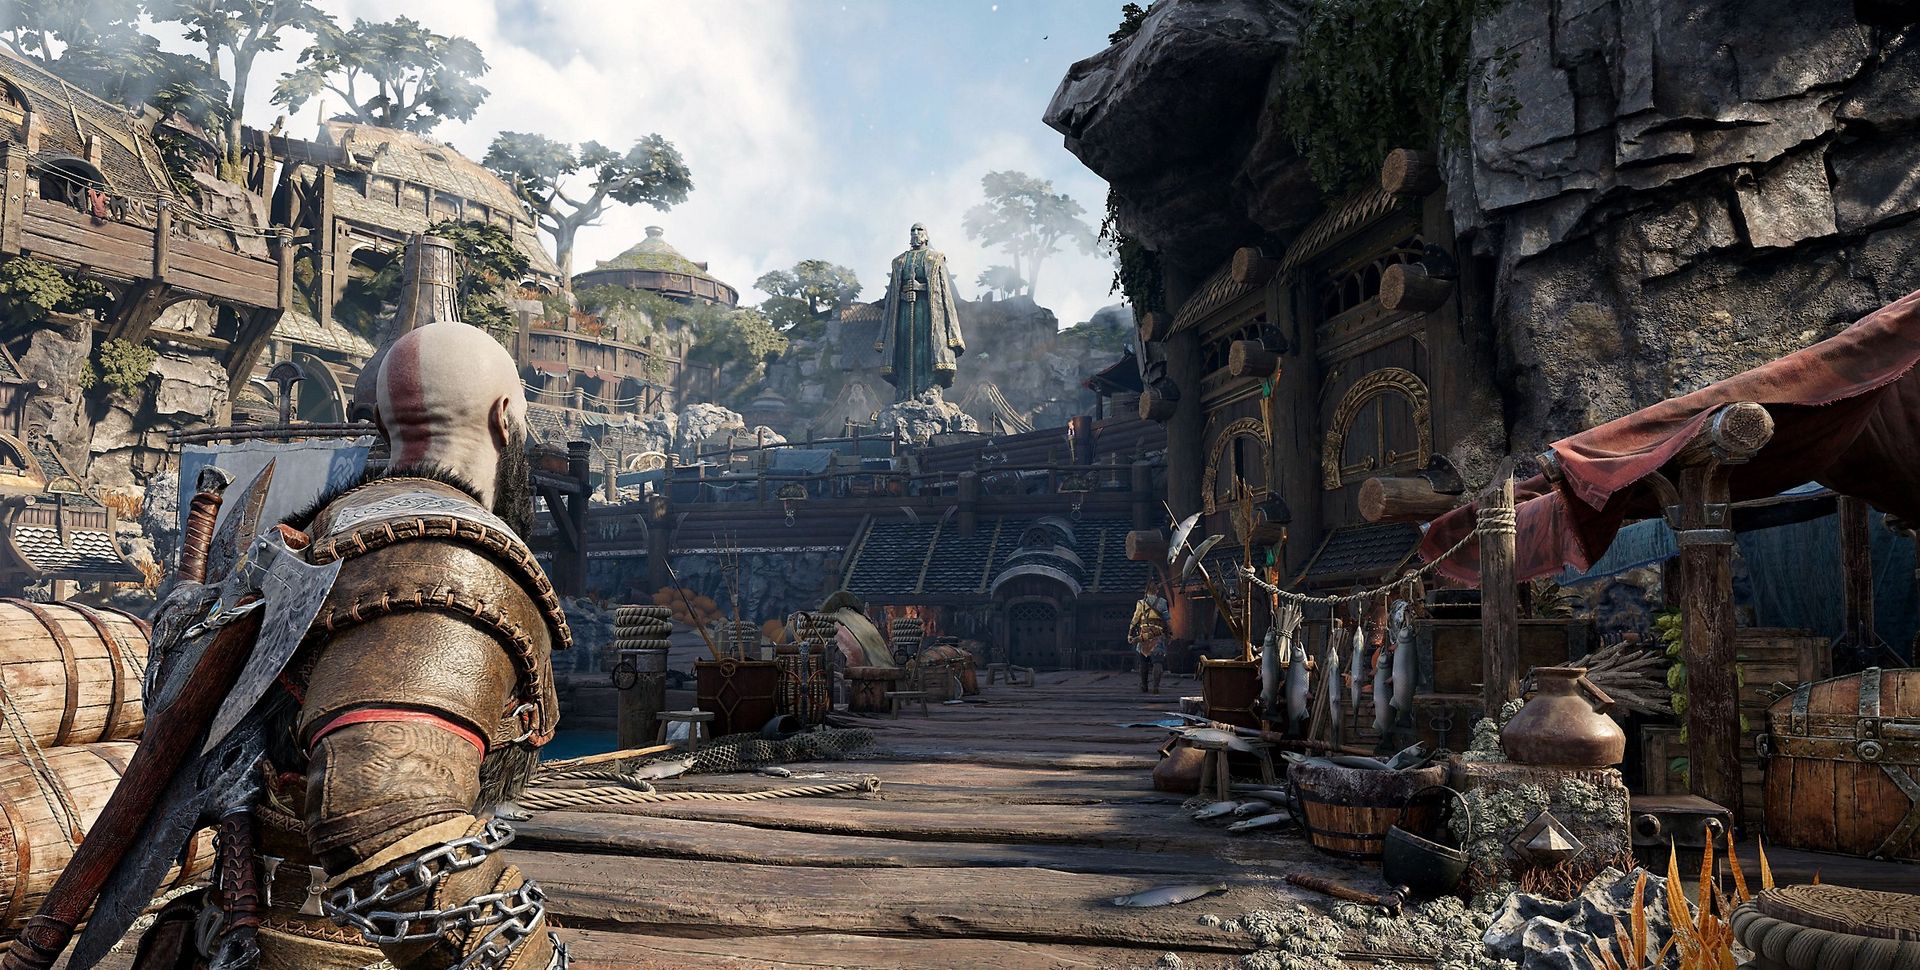 There are 5 collectible spots in God of War Althoff Rig. This walkthrough will take you chronologically through all of the collectibles in Althjof's Rig...